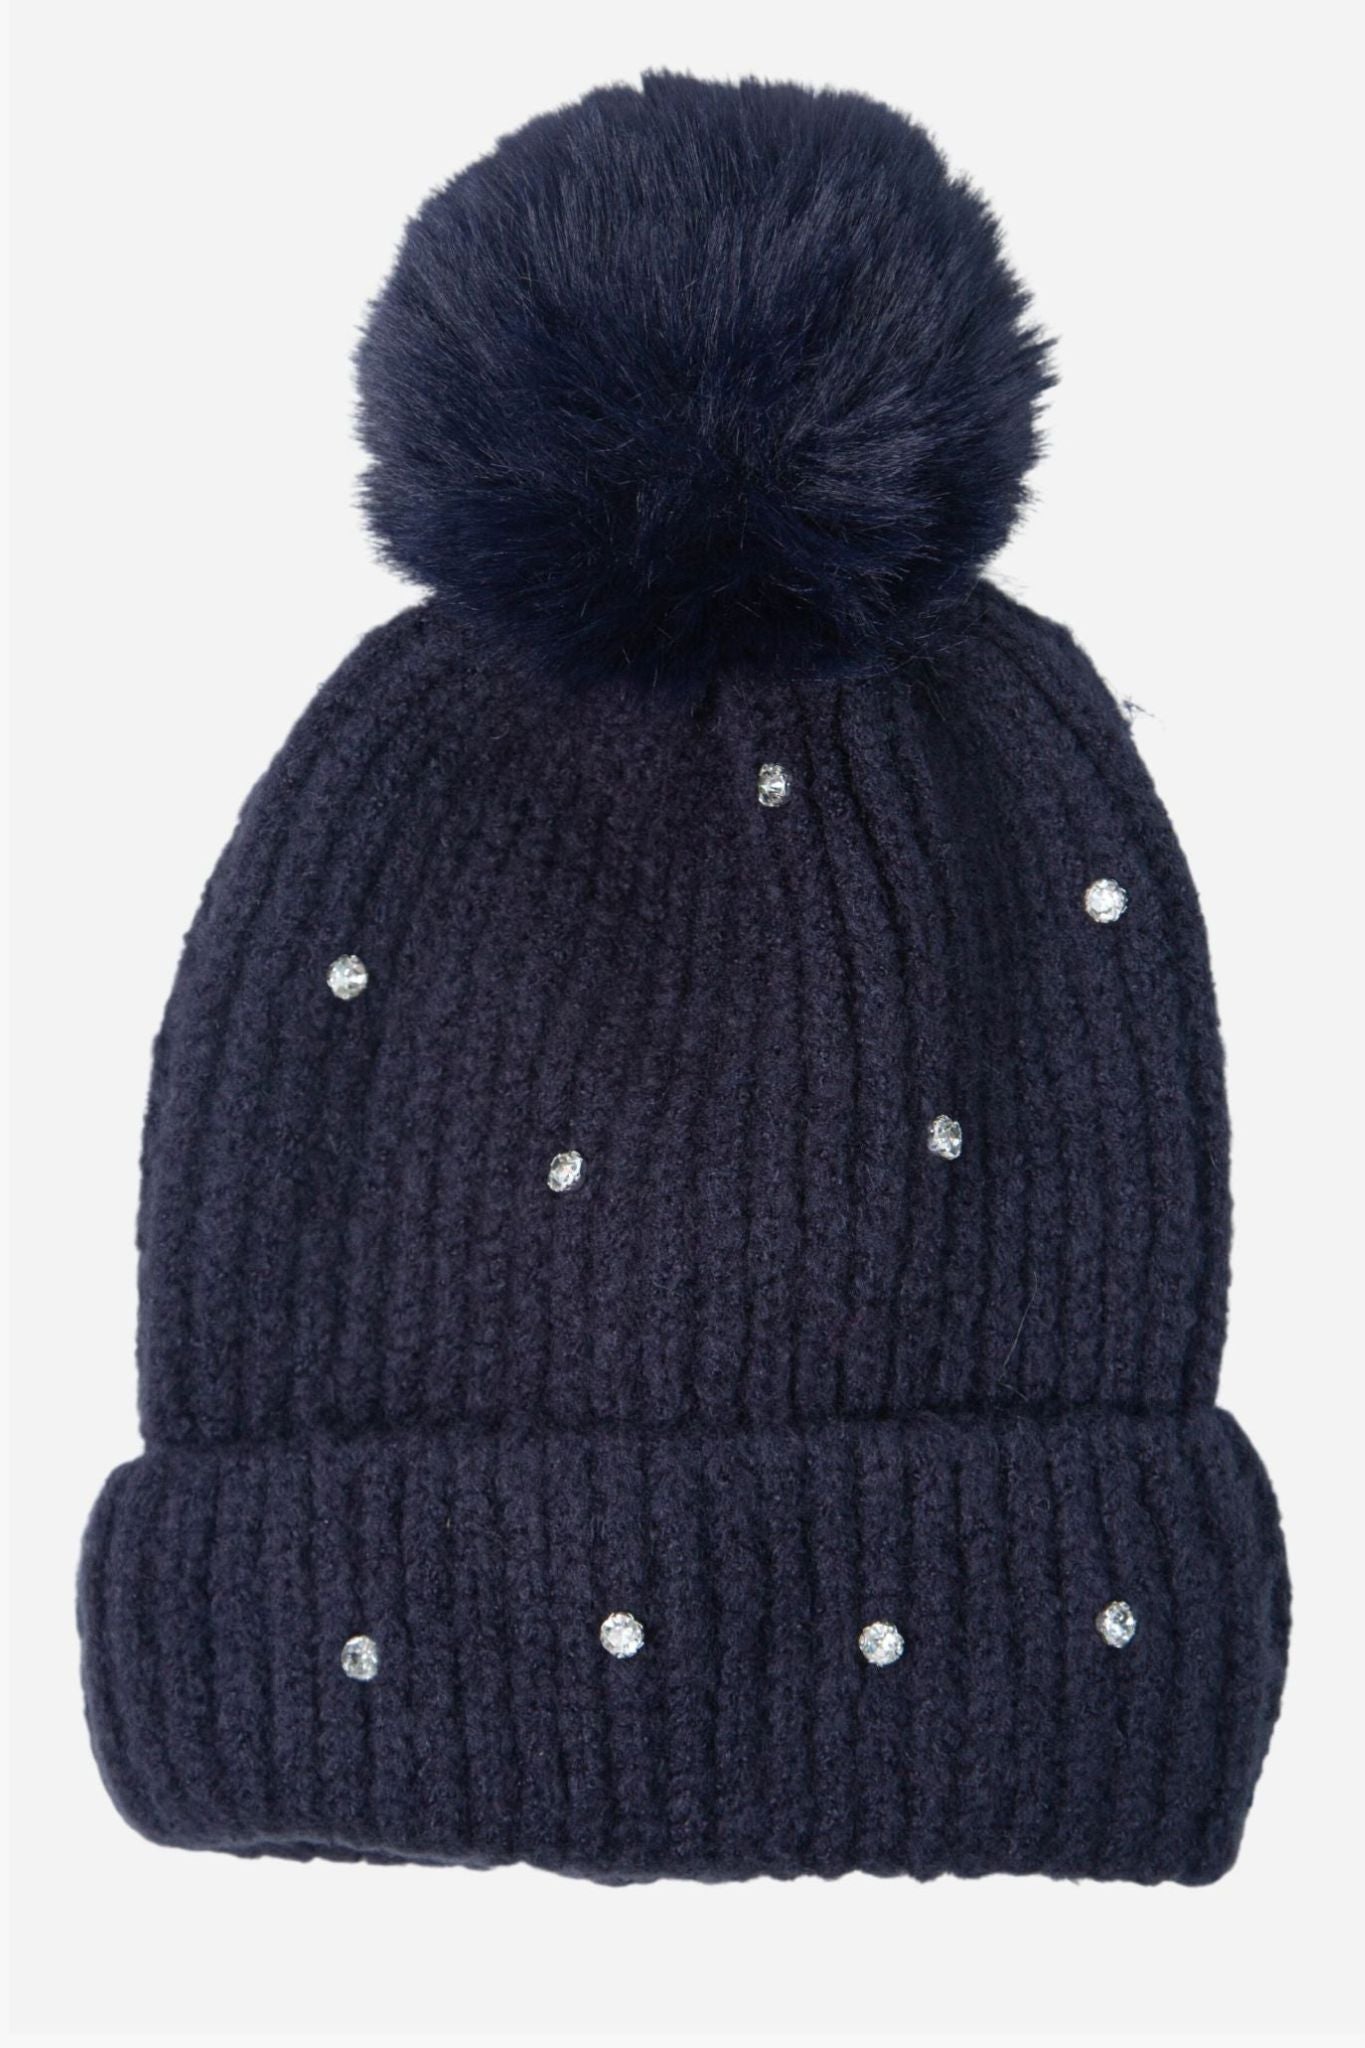 knitted navy blue bobble hat with a pom pom and all over diamante sparkles